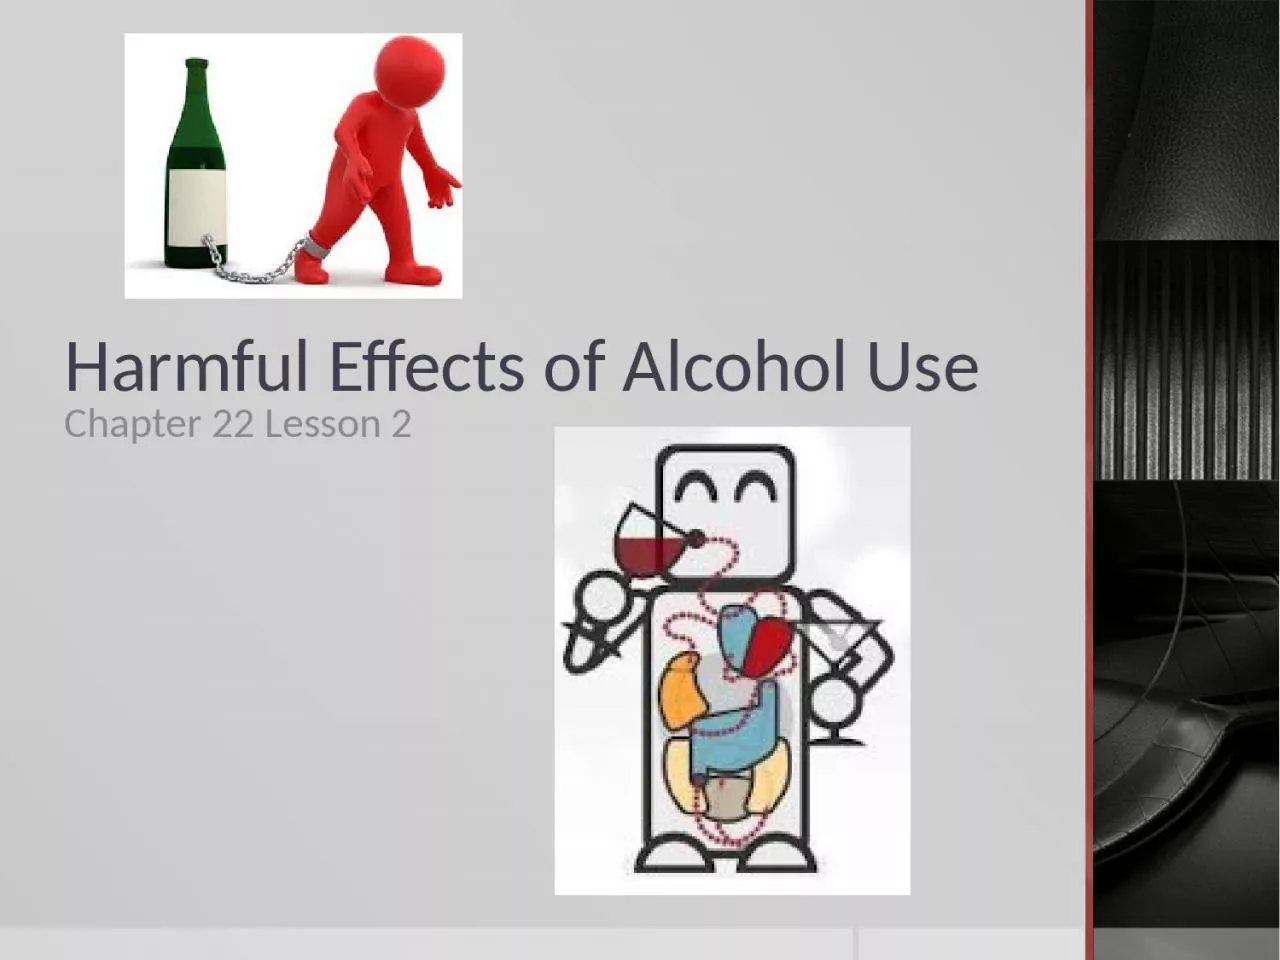 Harmful Effects of Alcohol Use